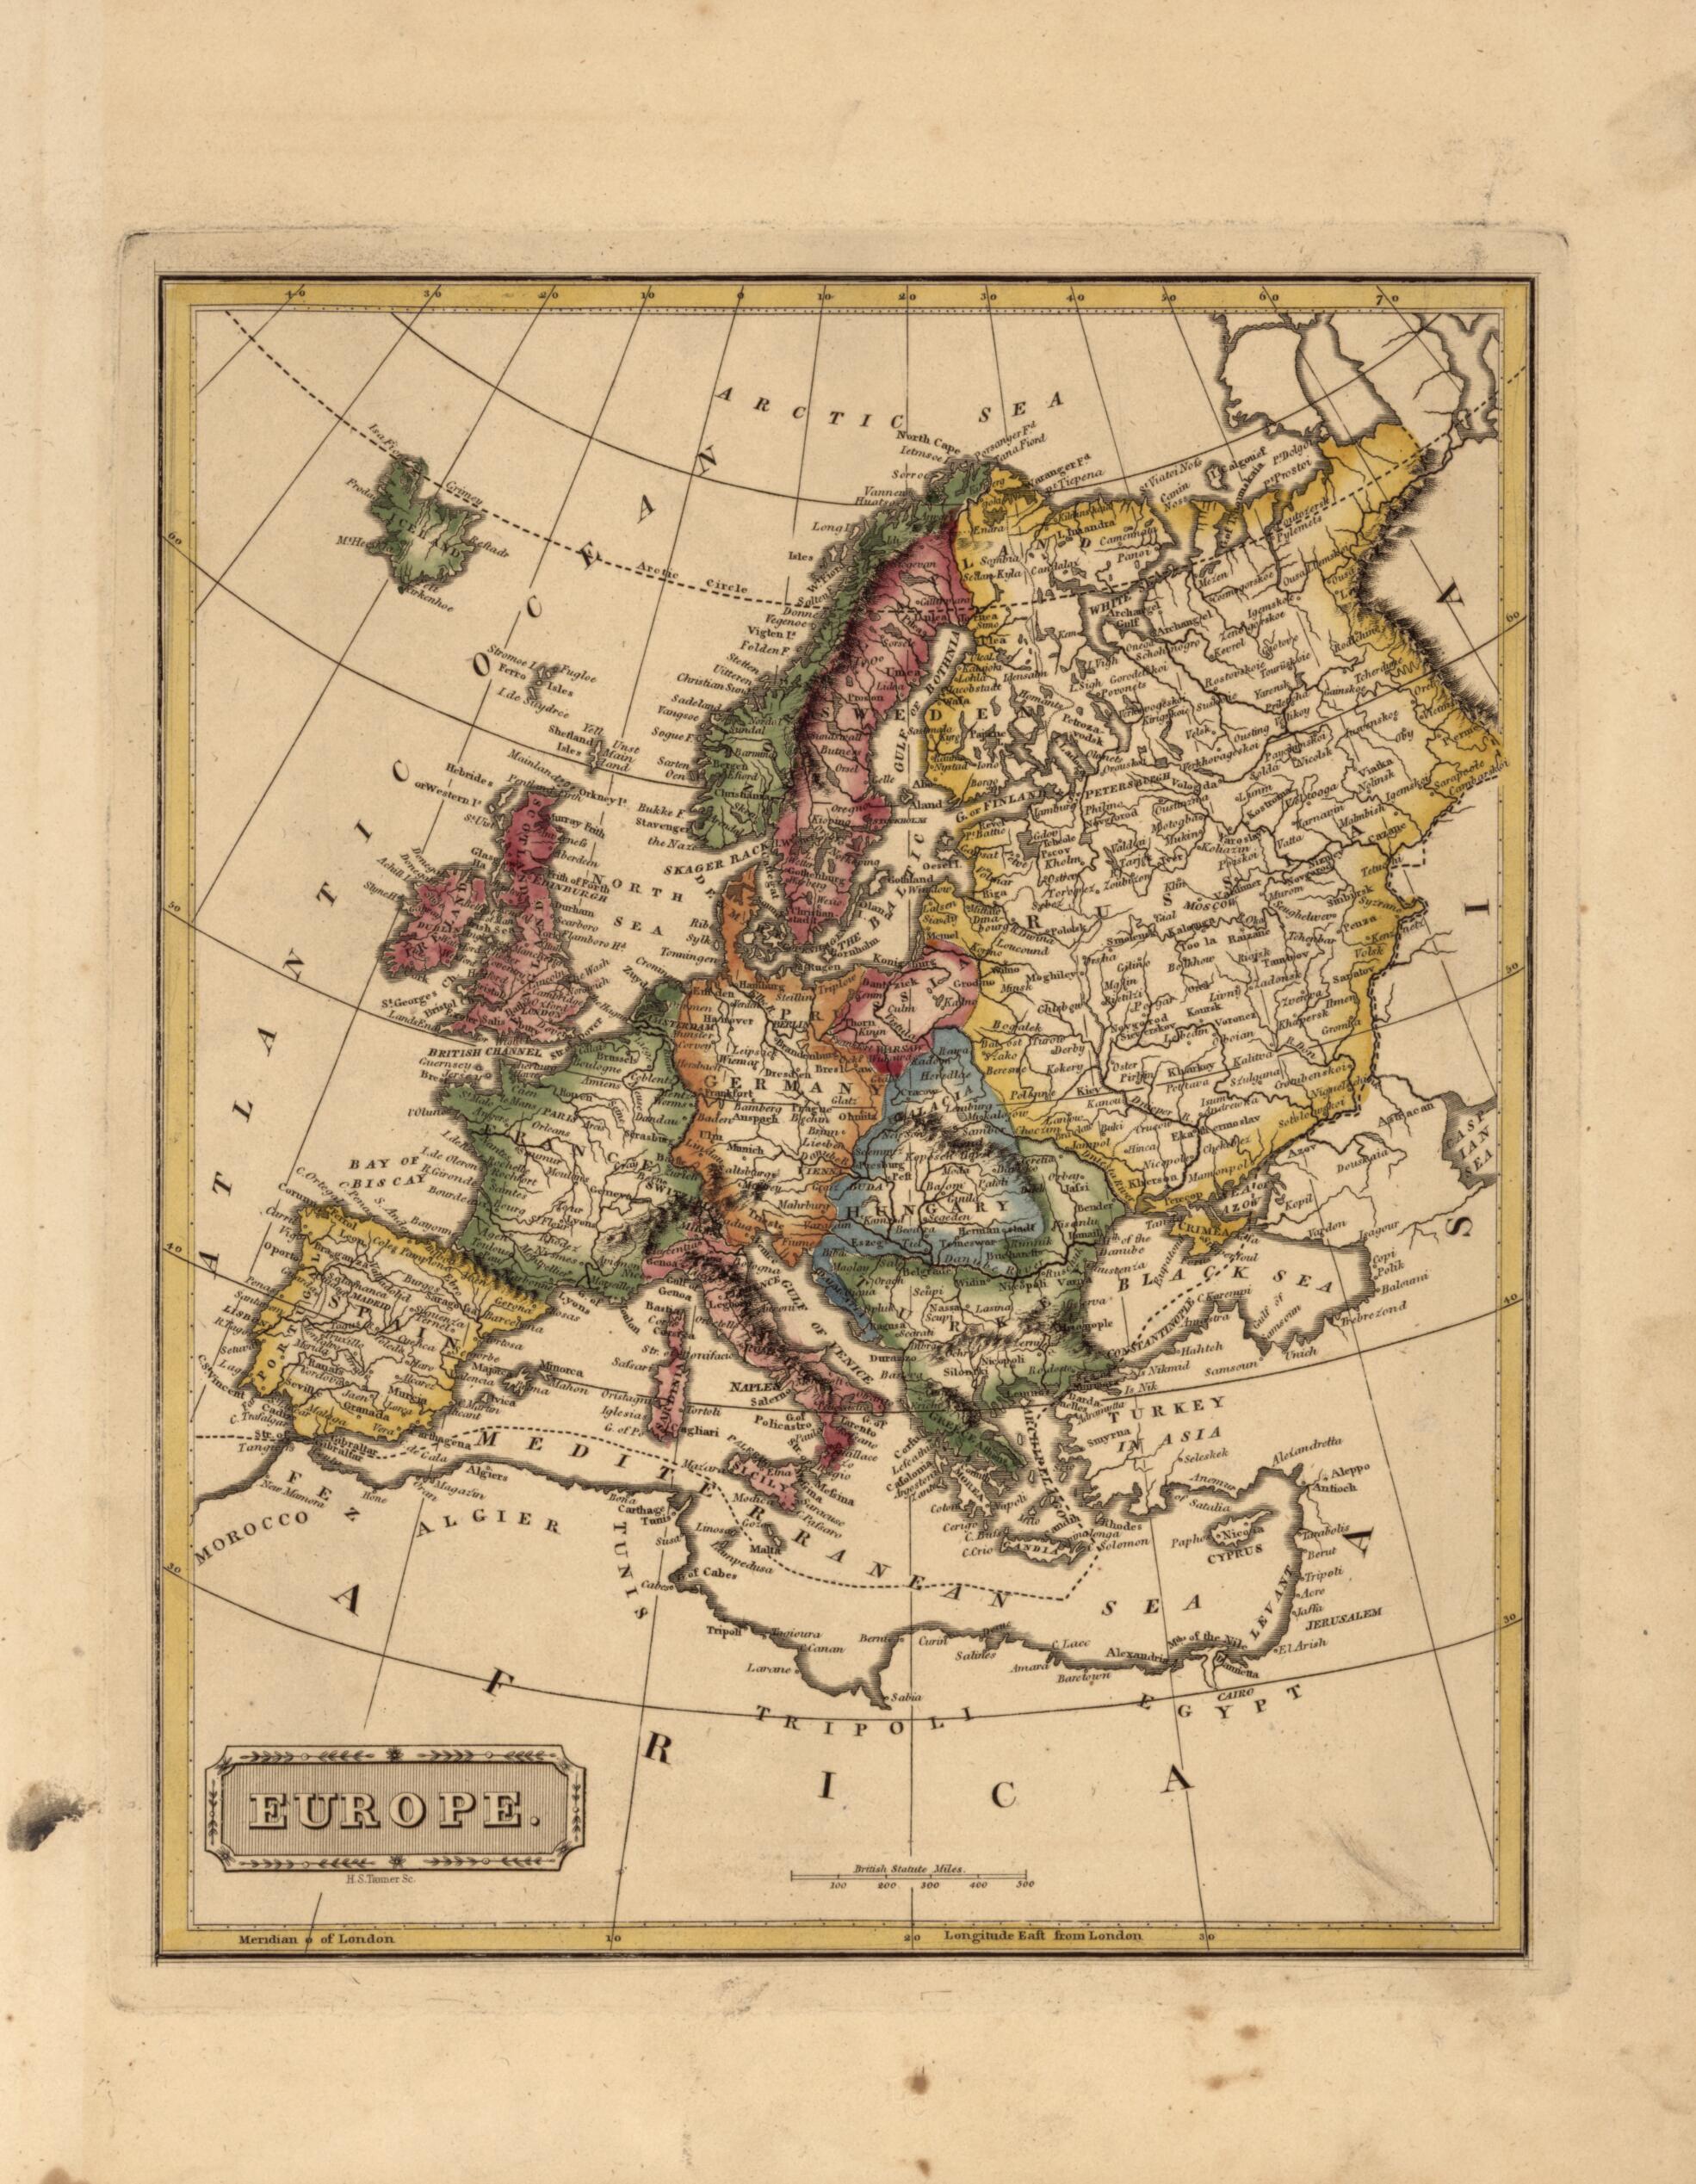 This old map of Europe from a New and Elegant General Atlas, Containing Maps of Each of the United States. from 1817 was created by Henry Schenck Tanner in 1817